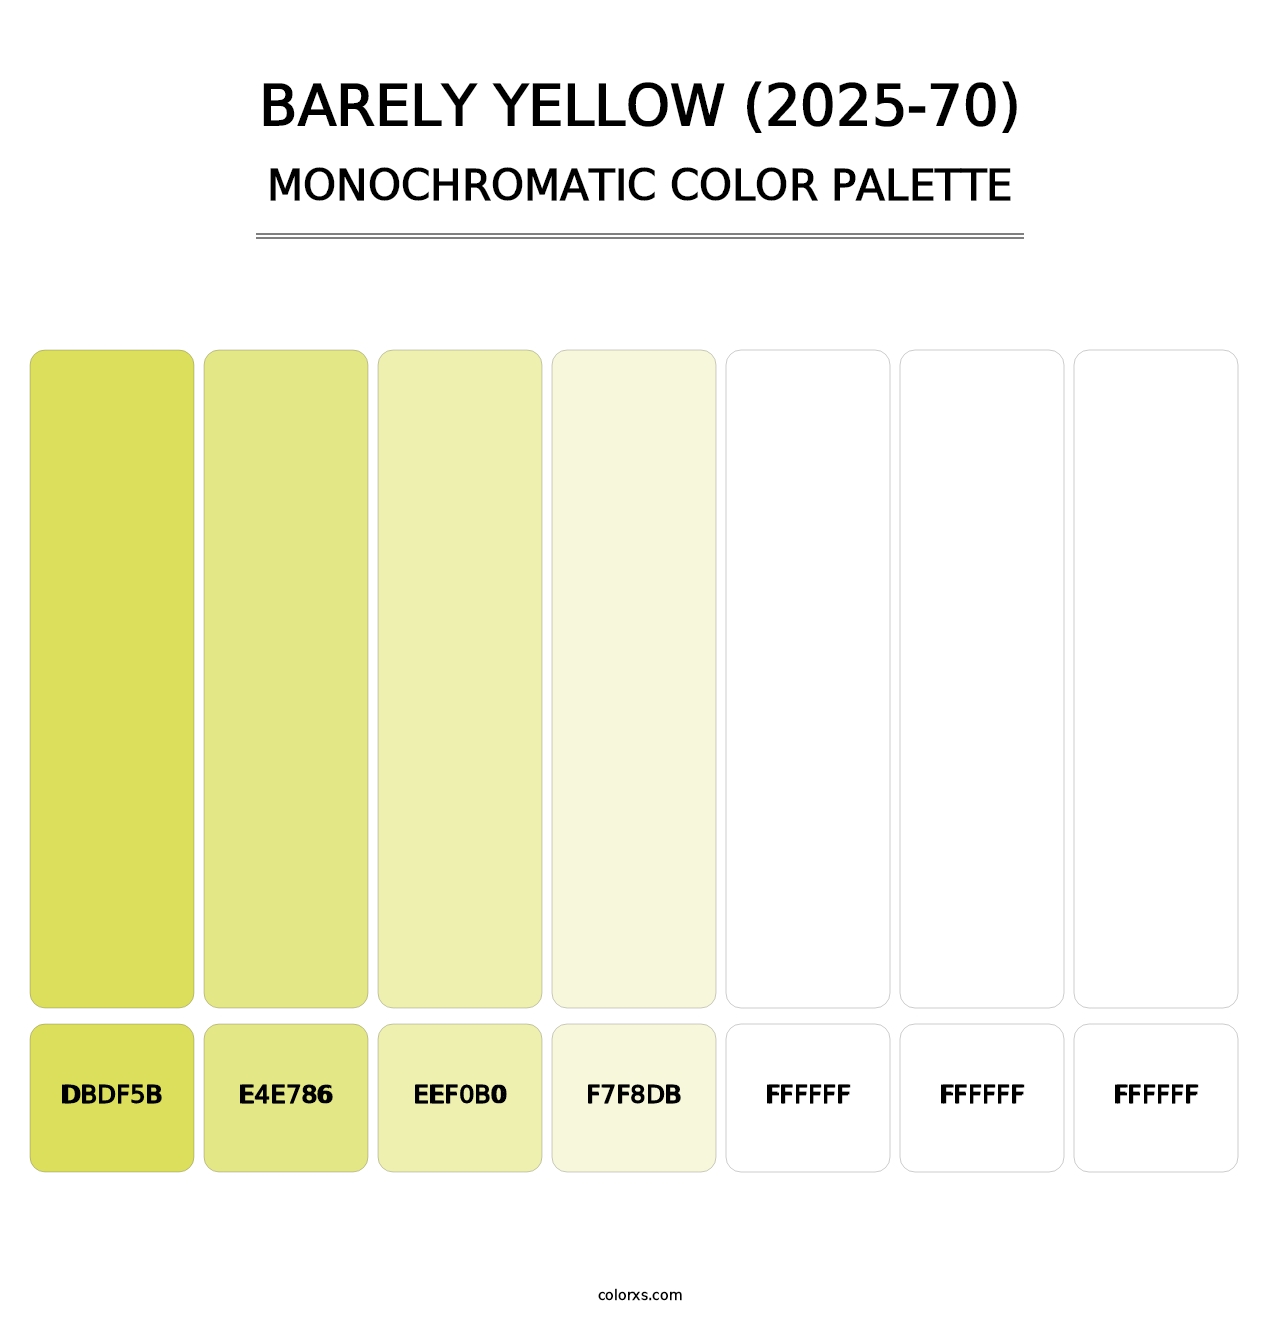 Barely Yellow (2025-70) - Monochromatic Color Palette